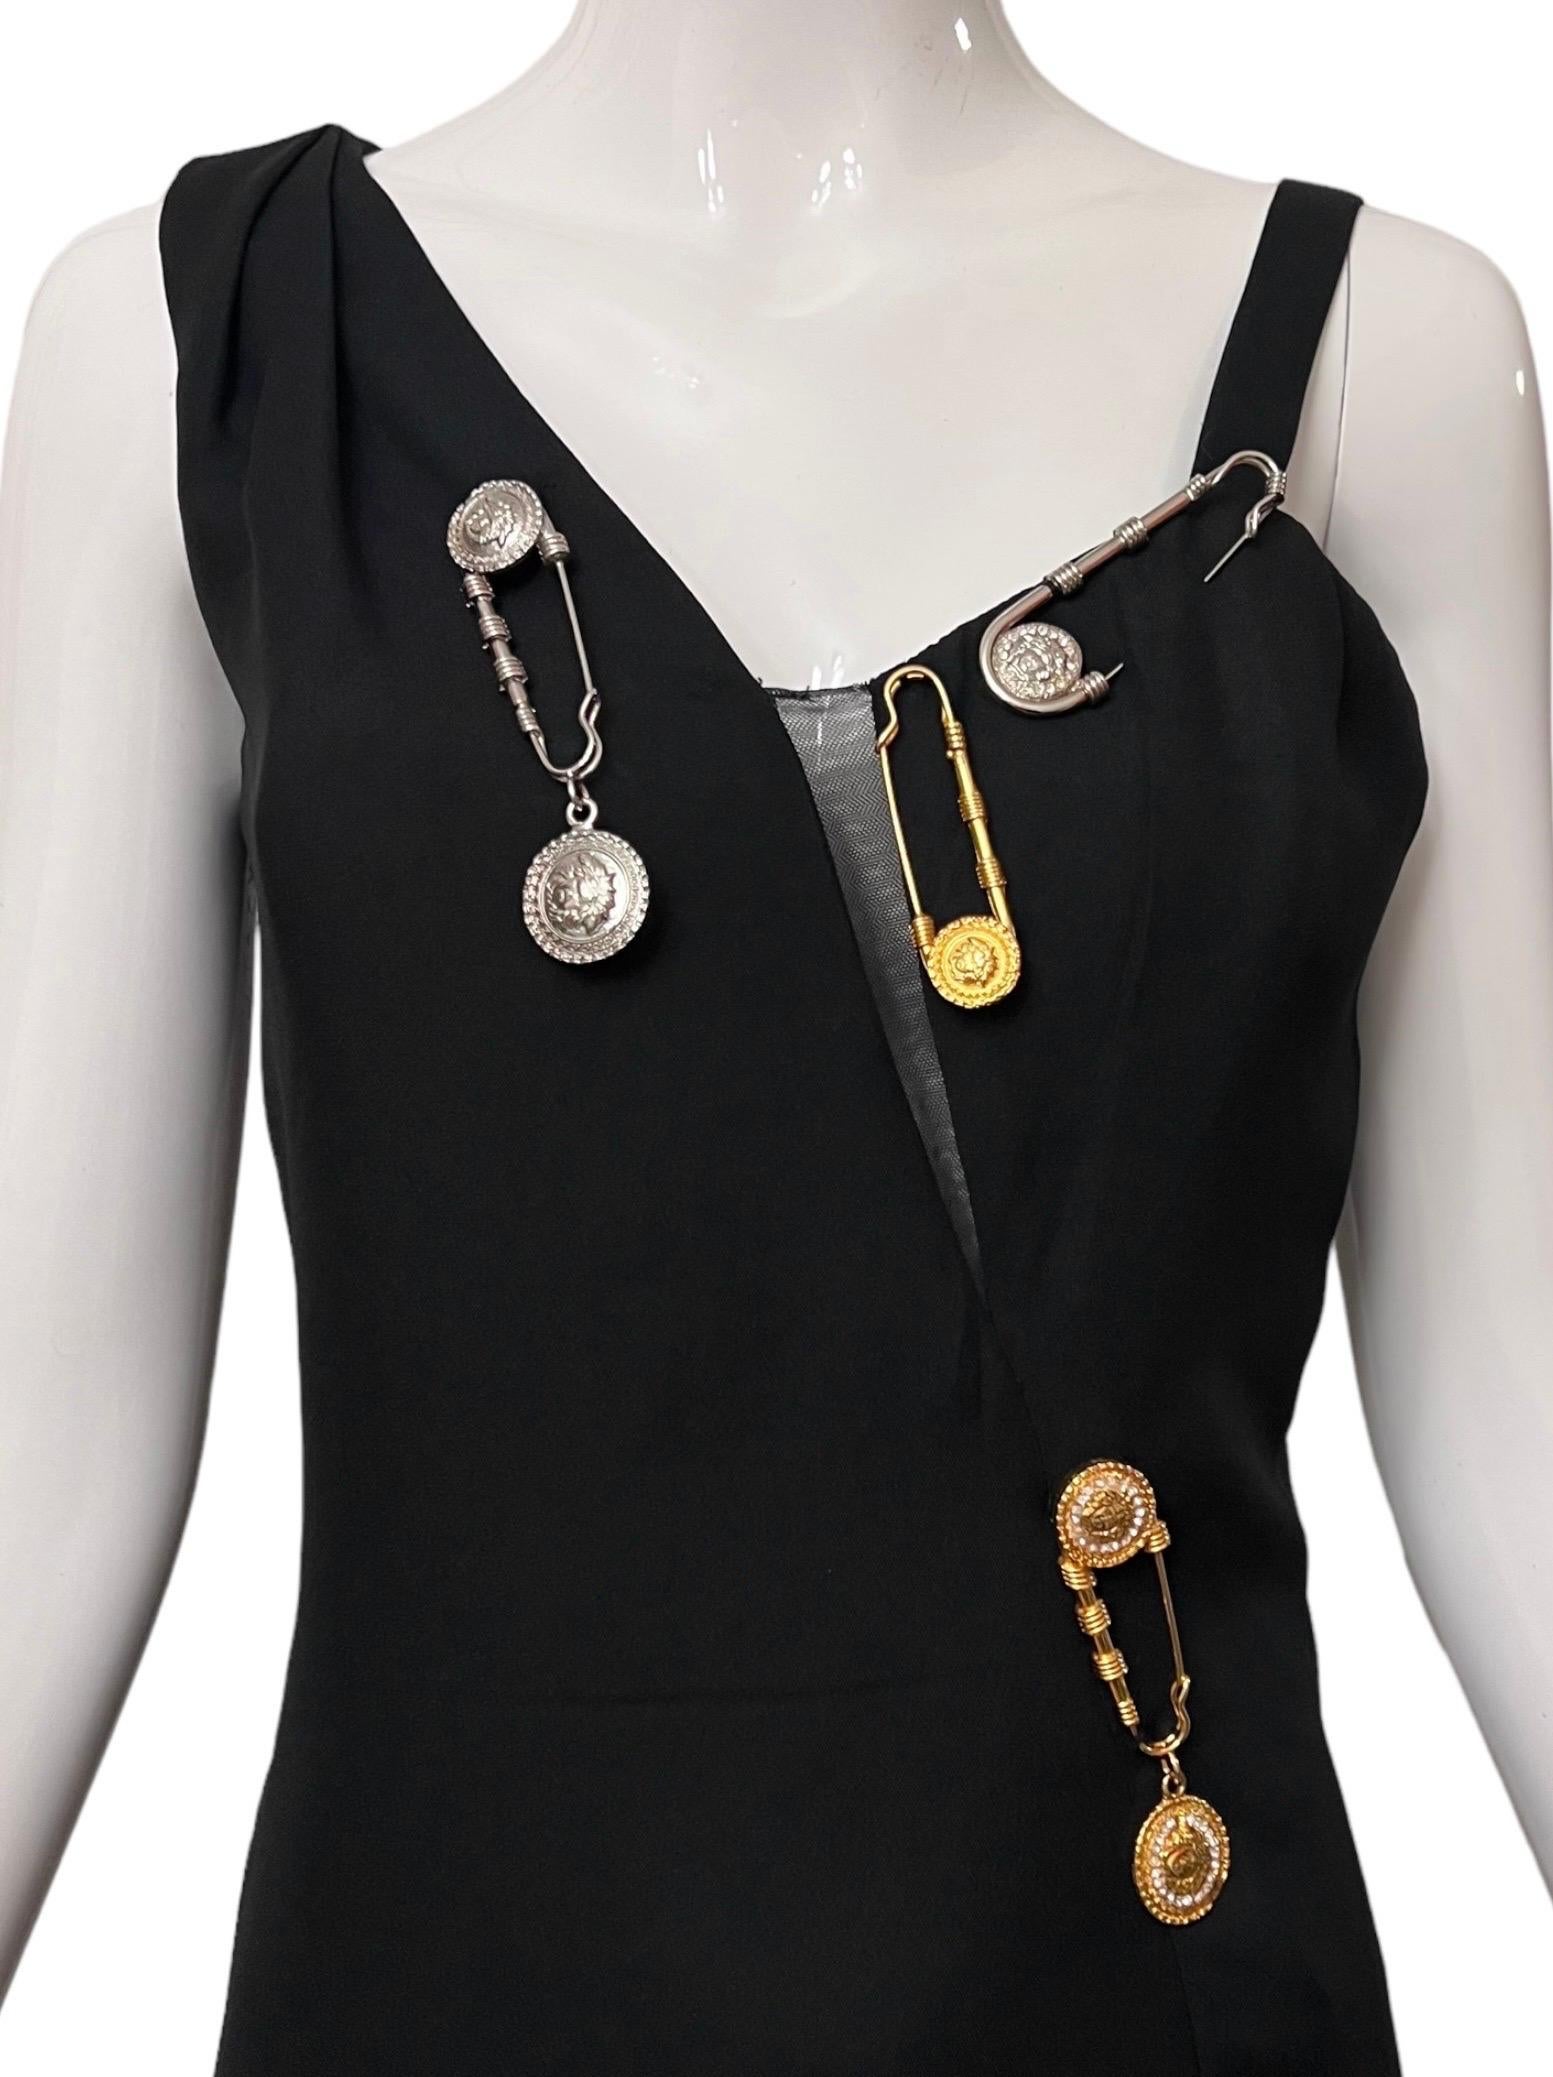 Stunning Gianni Versace vintage black safety pin mini dress from the iconic Spring Summer 1994 punk inspired collection.
The bodice of the dress is adorned with gold and silver Medusa metal safety pins, some are rhinestone encrusted. 
Side